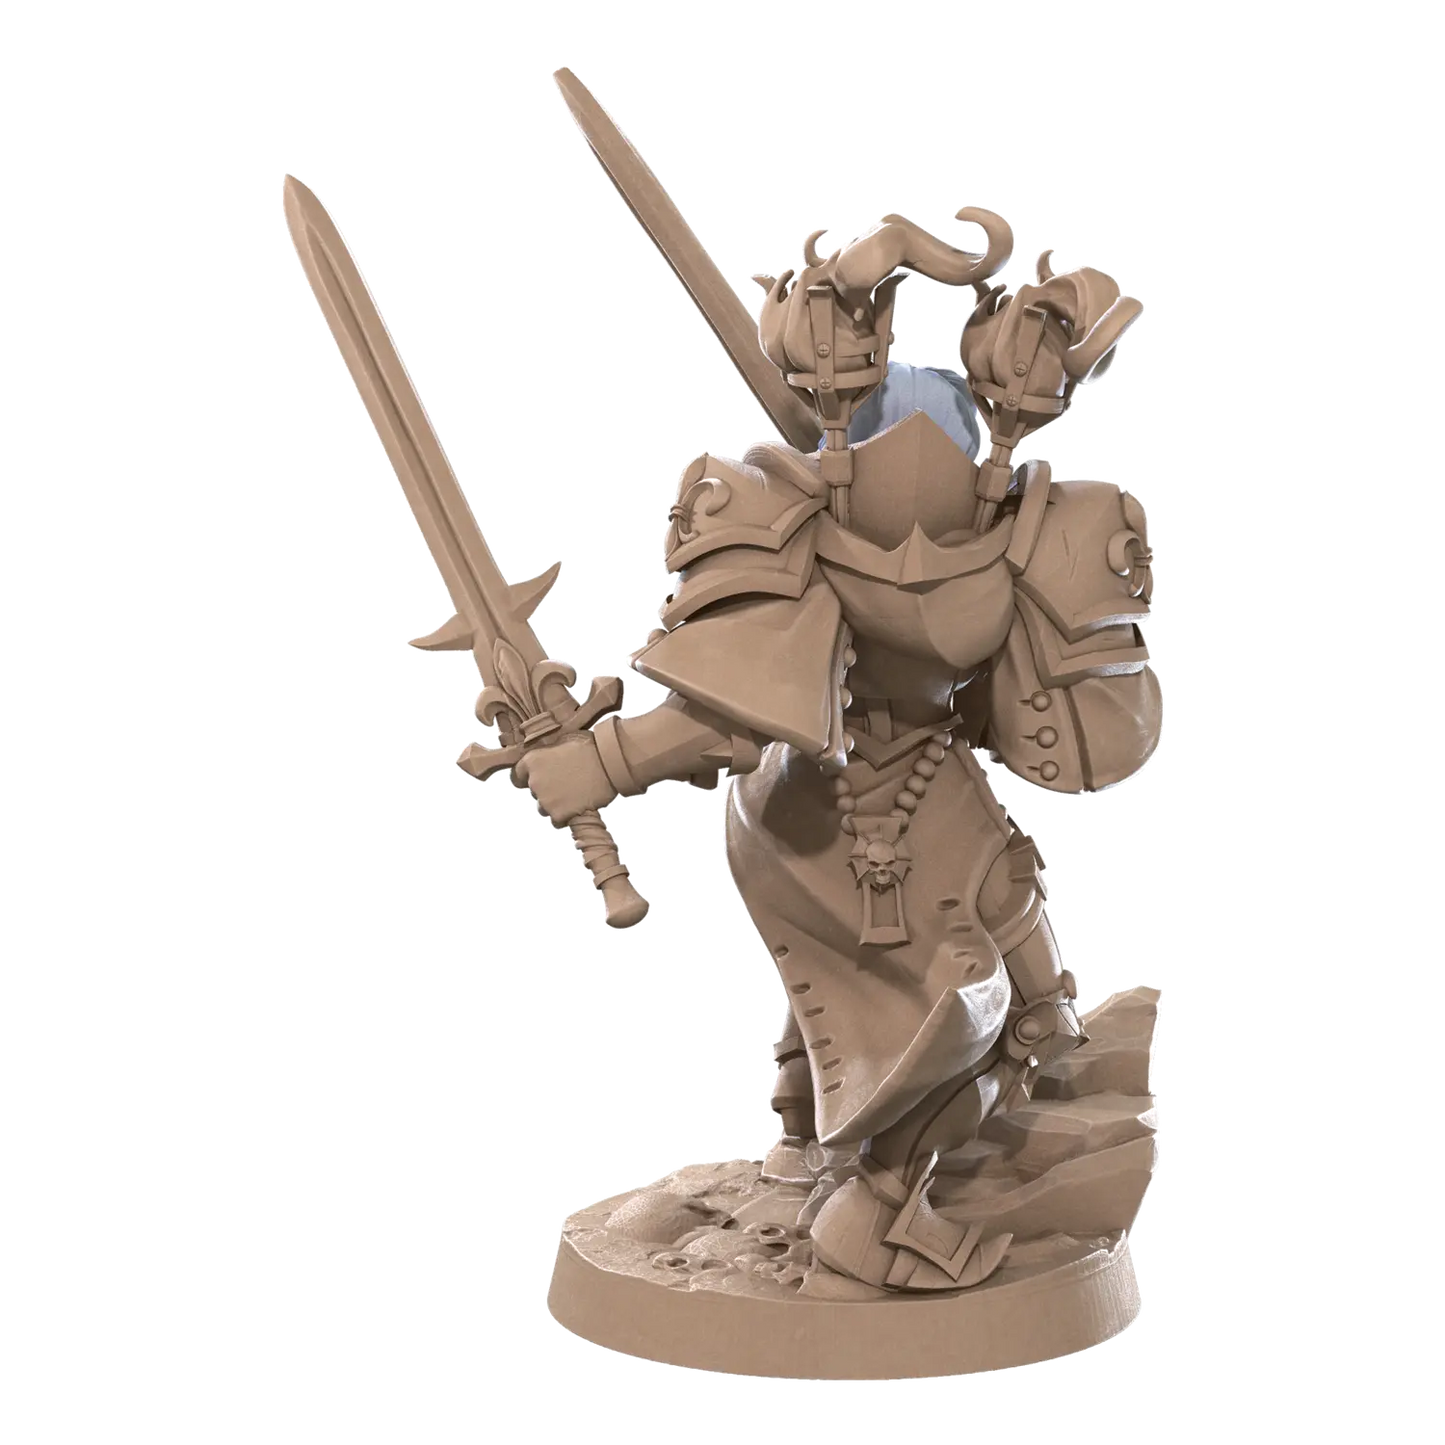 DnD Battle Sisters - Fighter - Human - Miniature - Paladin Cassandra 01 Battle Sisters - Fighter - Human - Miniature - Paladin sold by DoubleHitShop